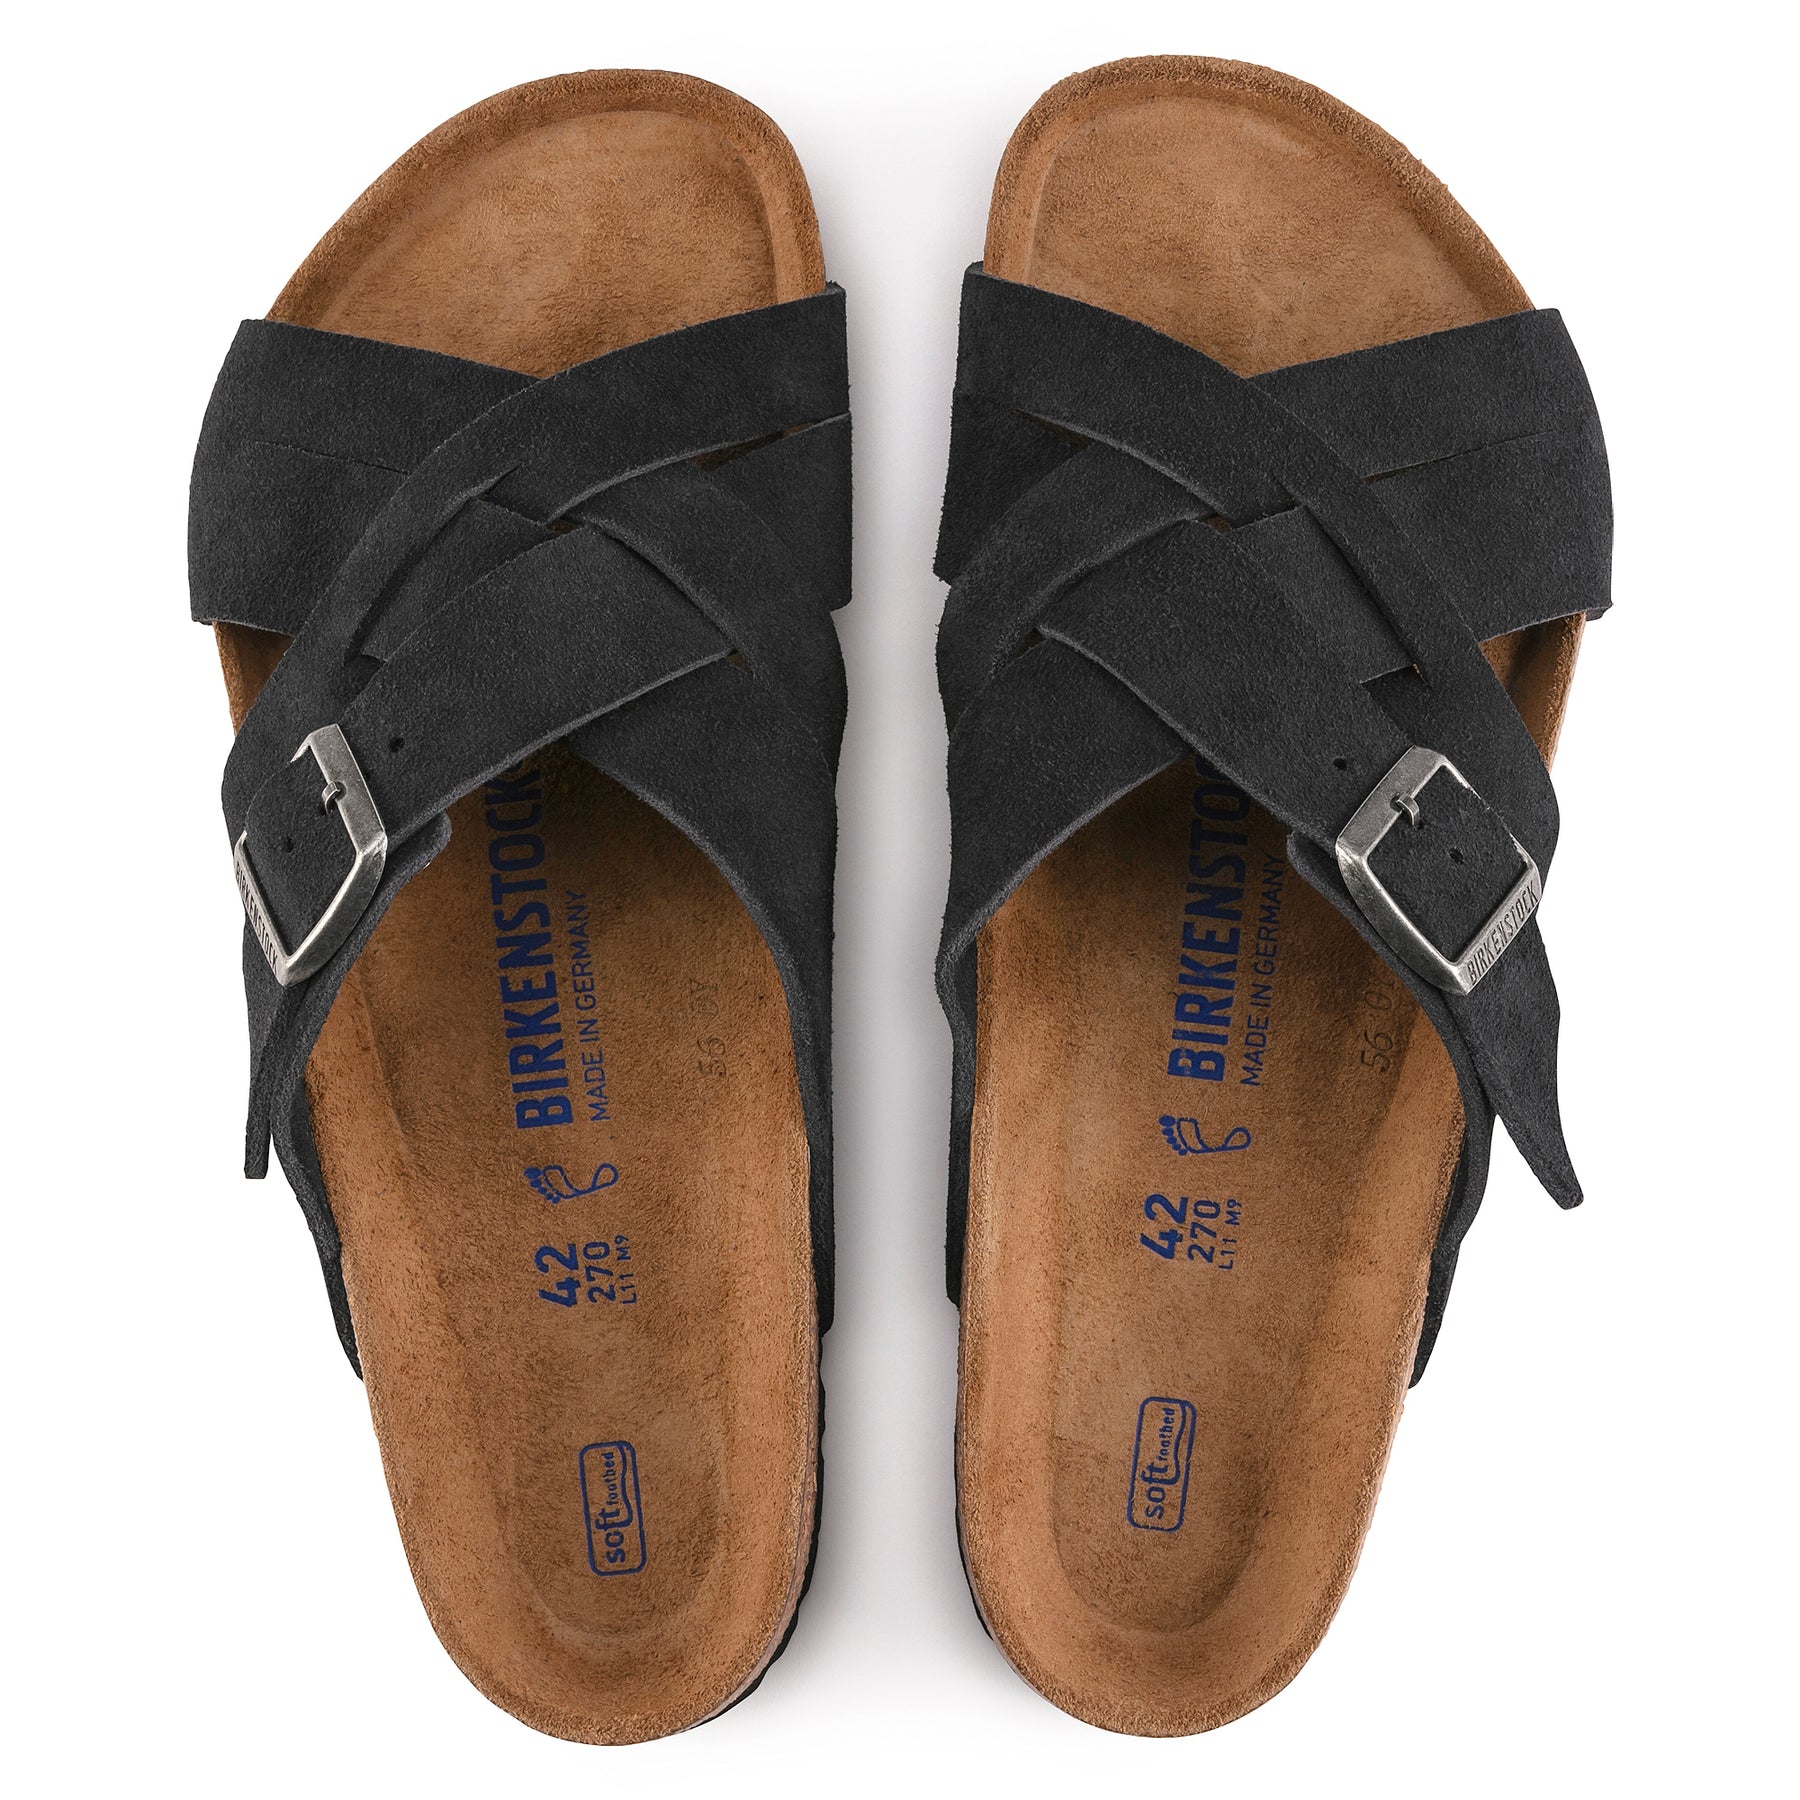 Birkenstock Limited Edition Lugano Soft Footbed midnight suede